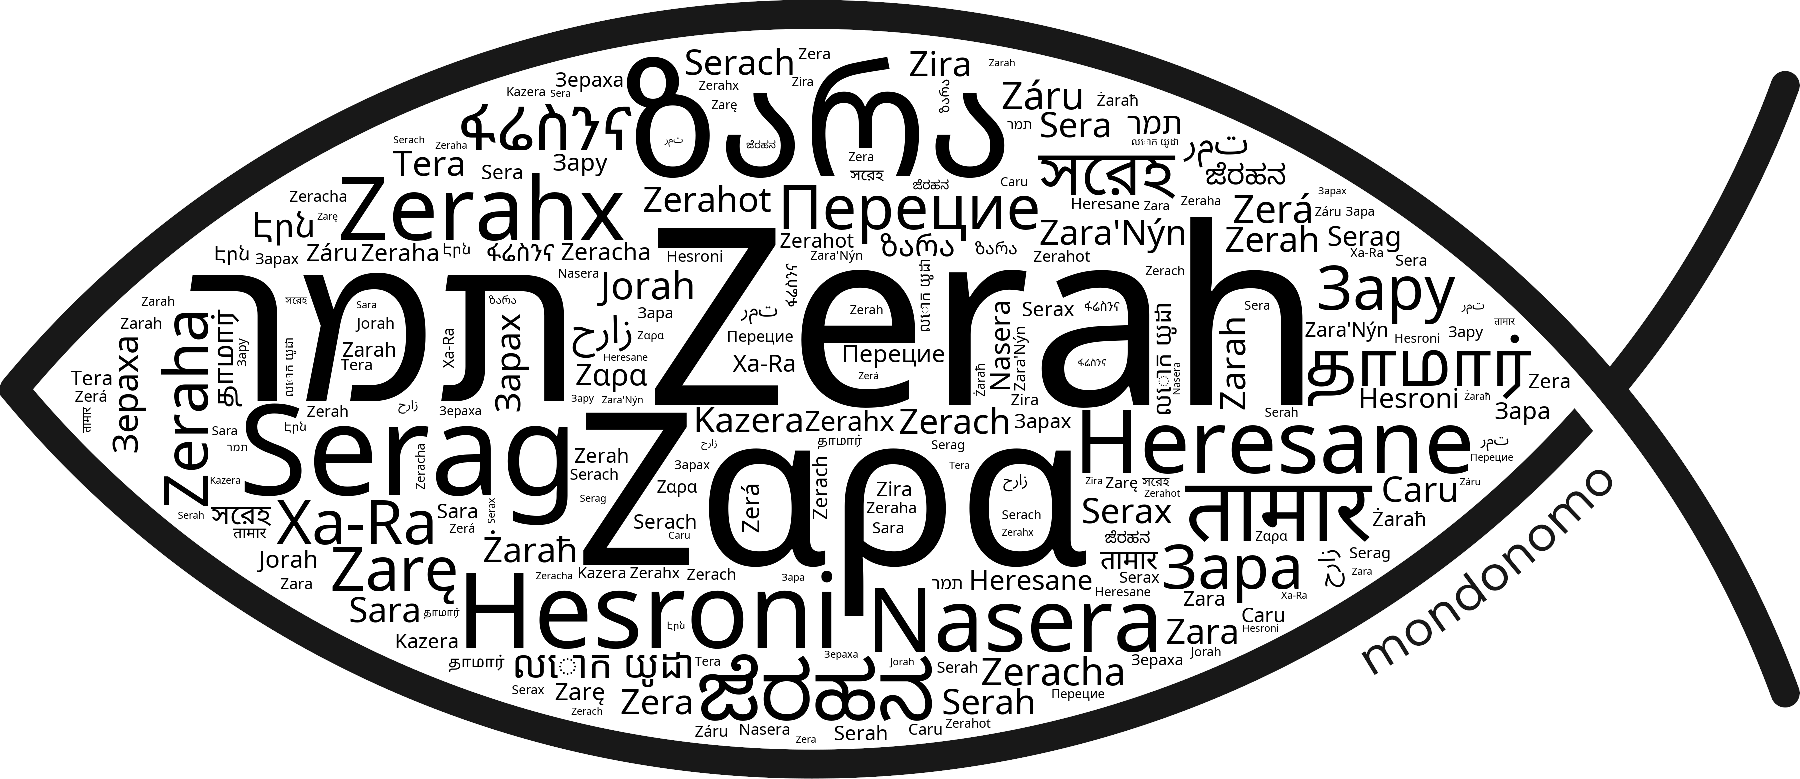 Name Zerah in the world's Bibles